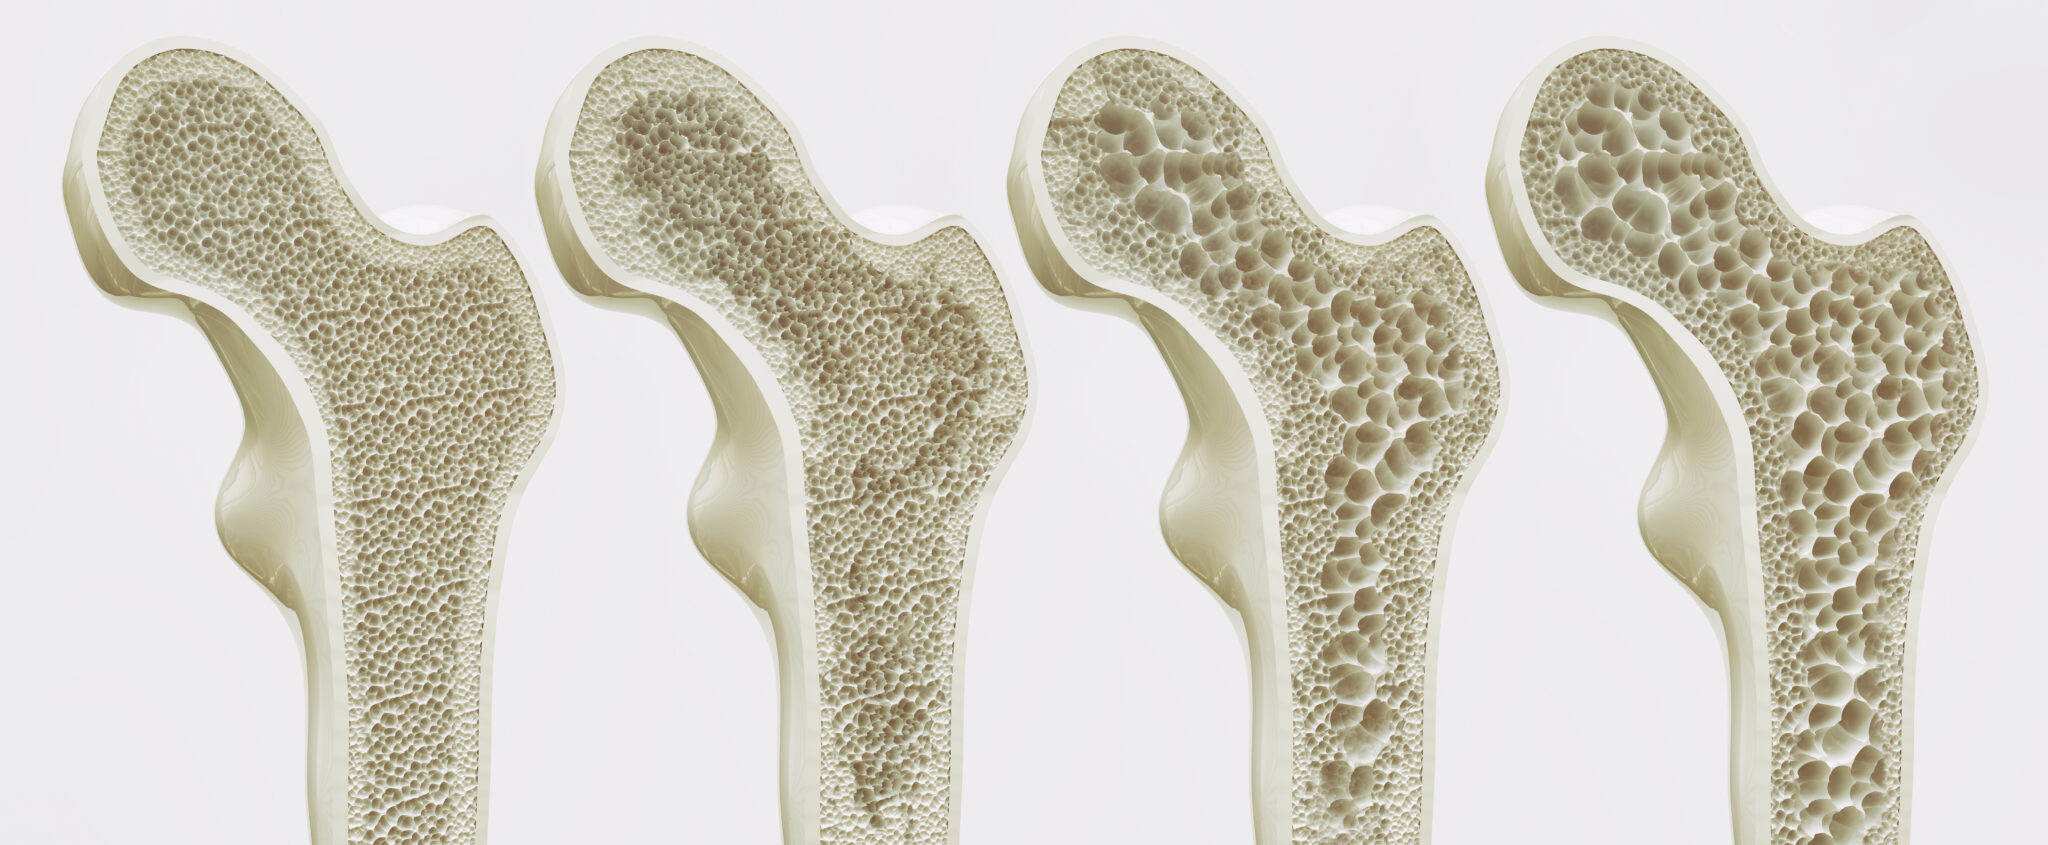 An image depicting various stages of bone health, from healthy to Osteoporotic.